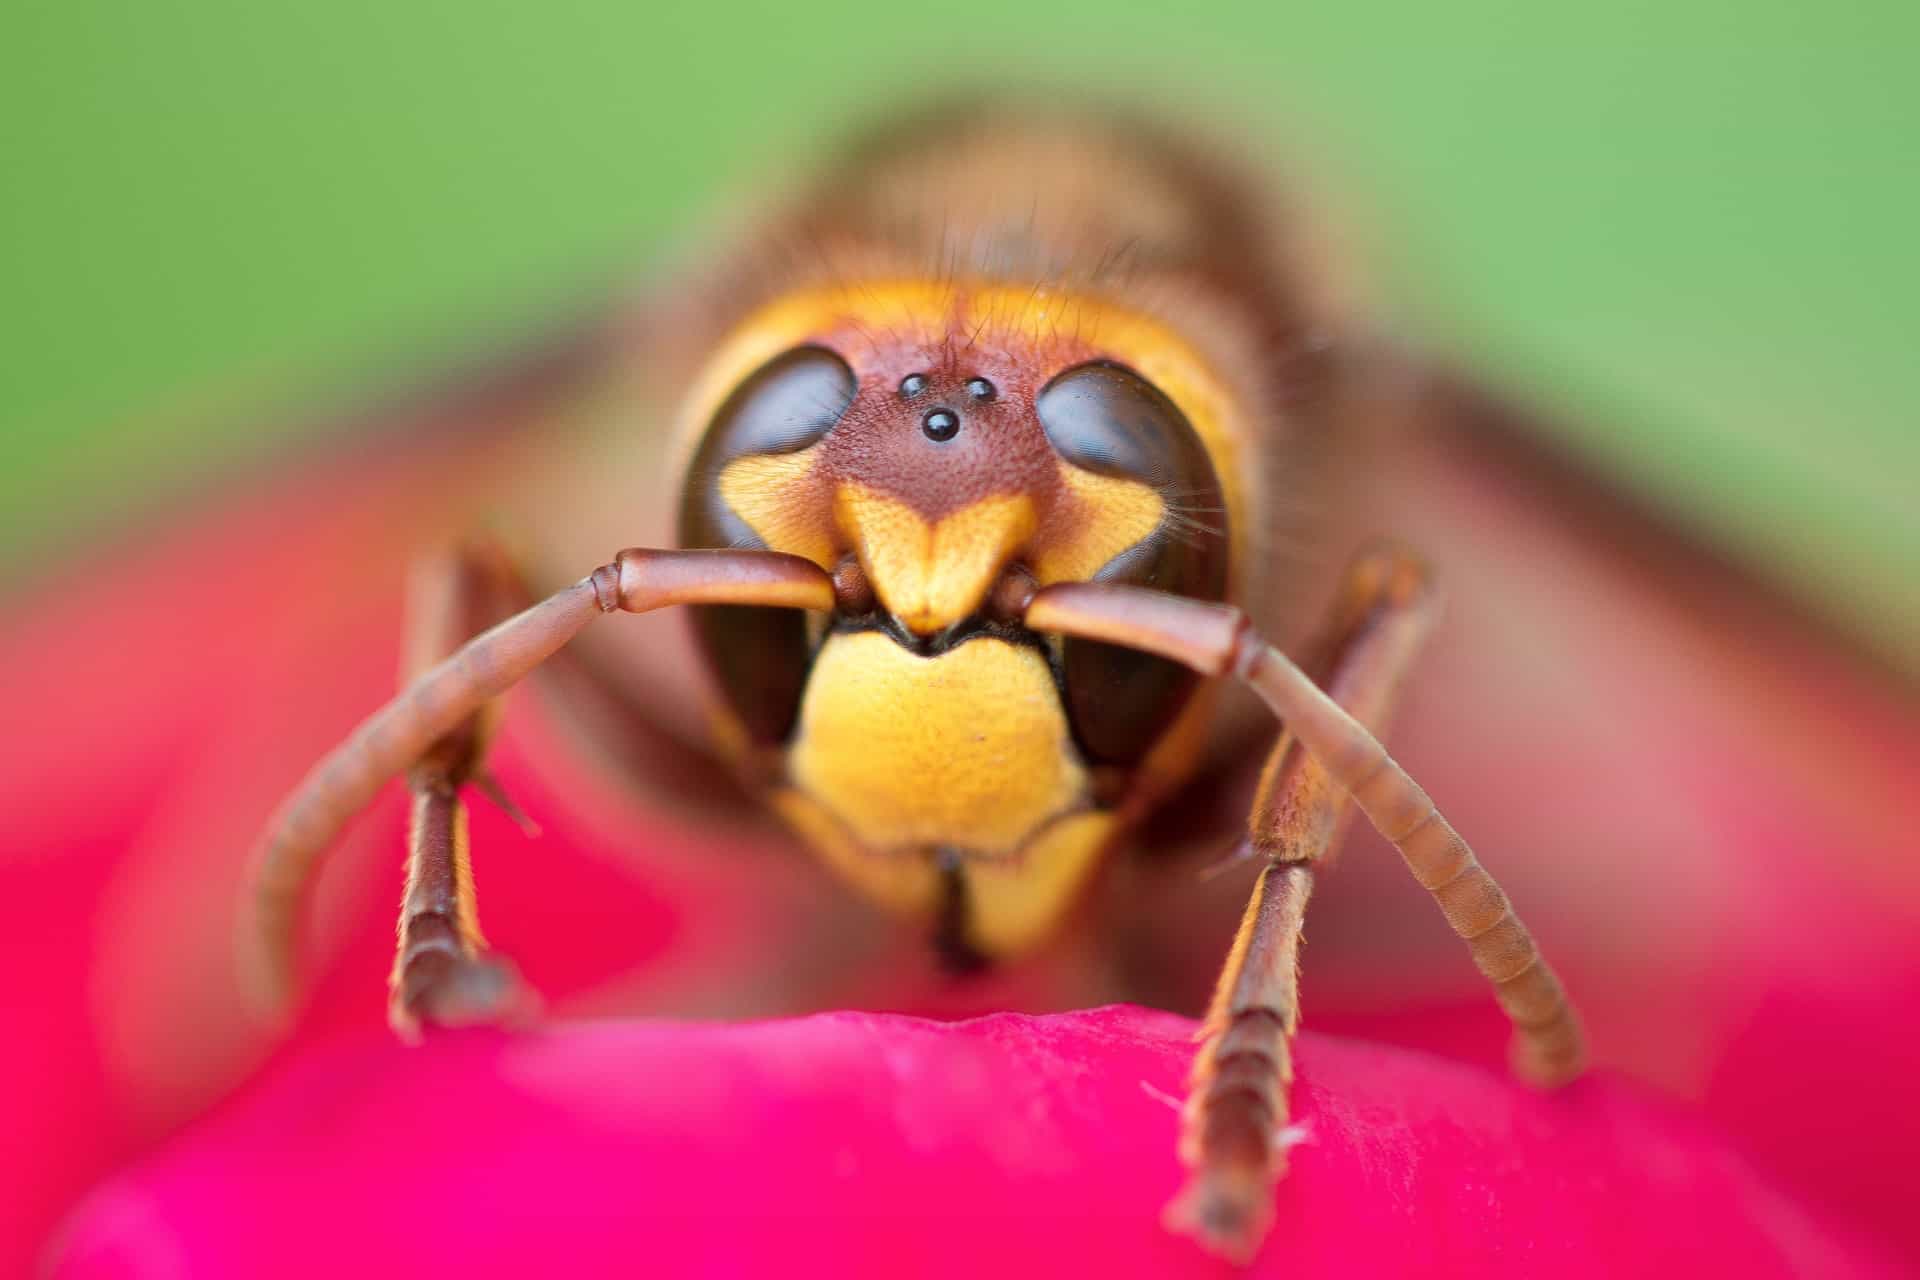 how many eyes does a bee have